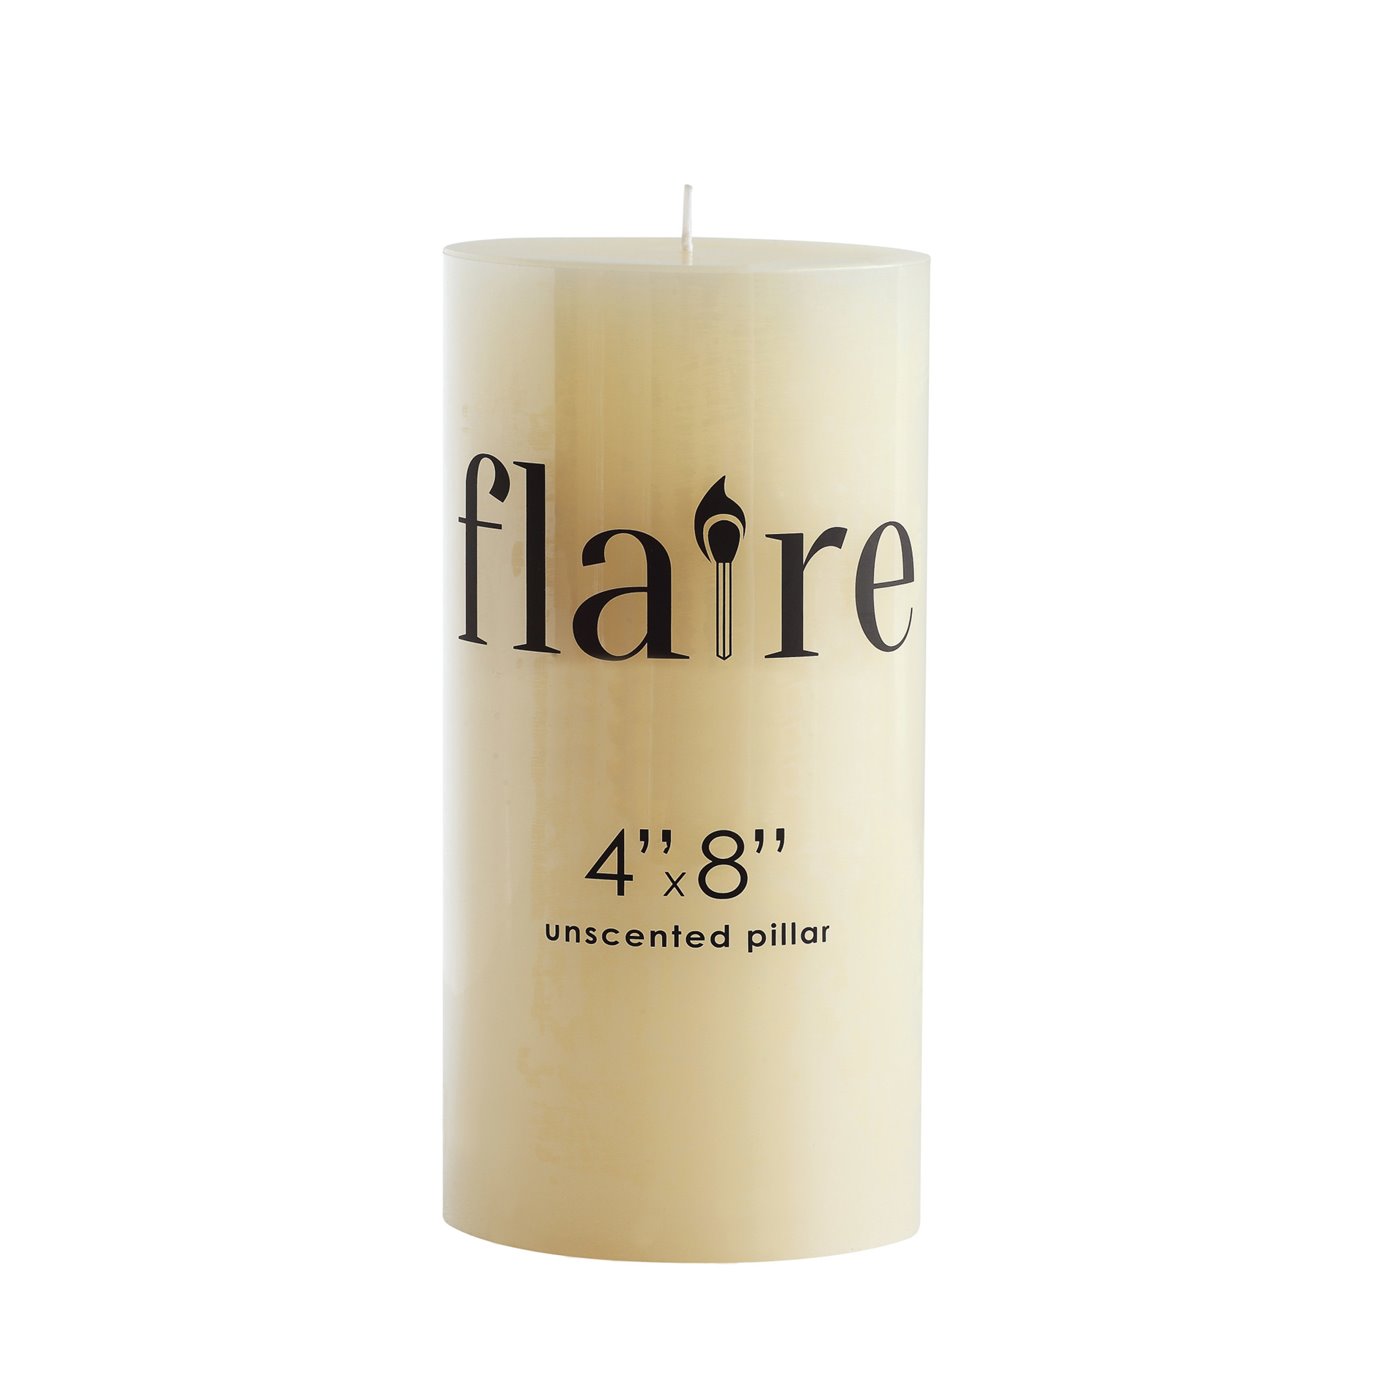 4" Round x 8"H Unscented Pillar Candle